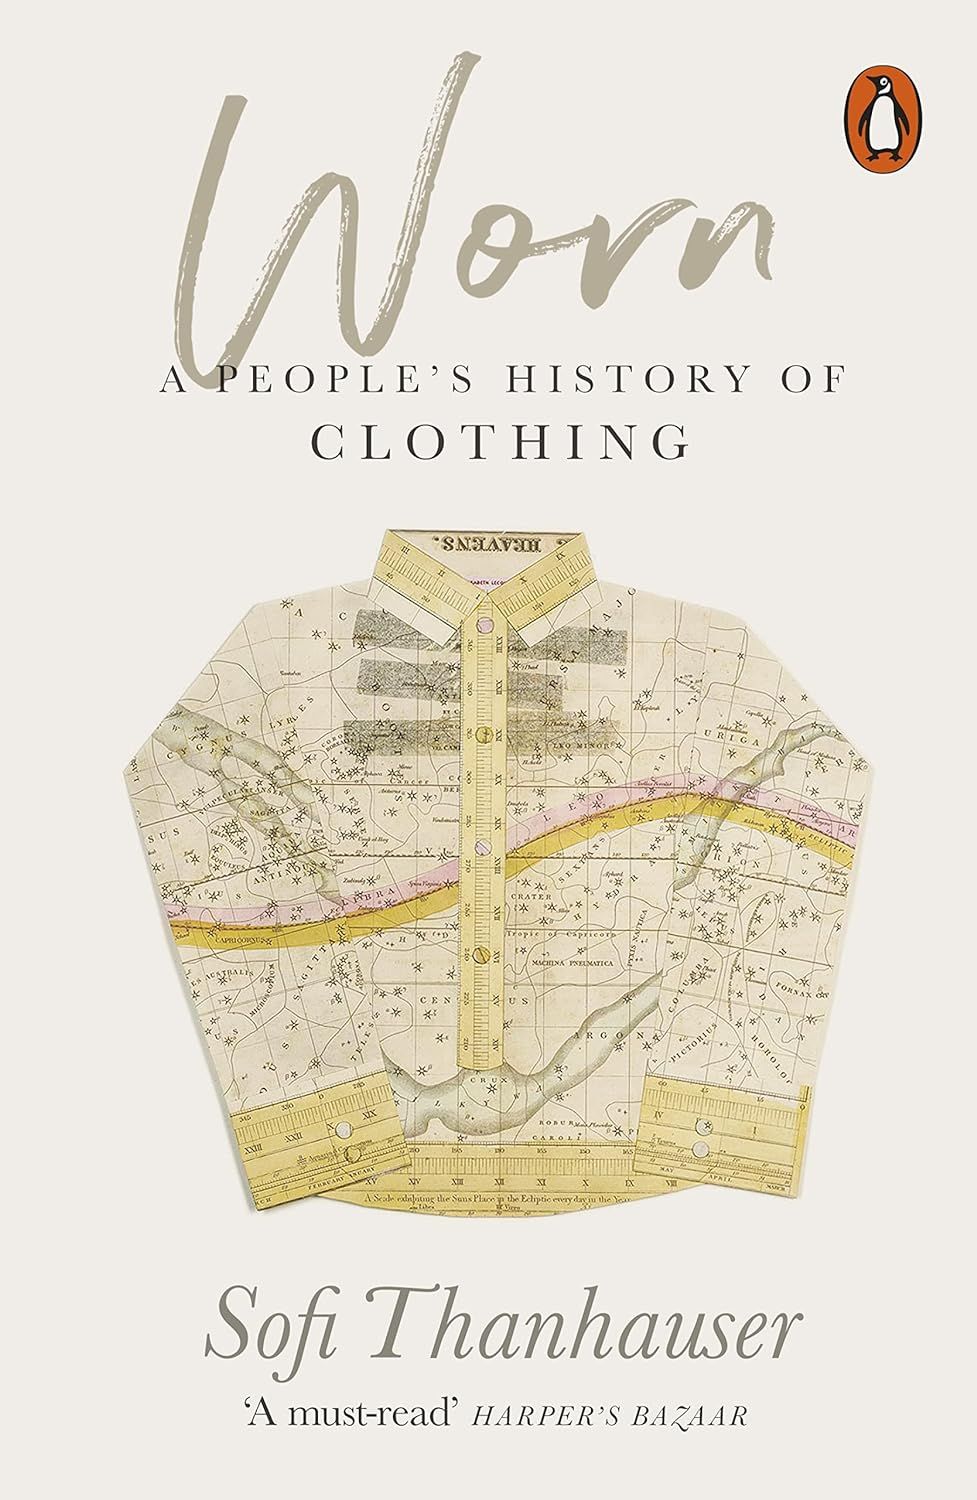 Worn: A people’s history of clothing